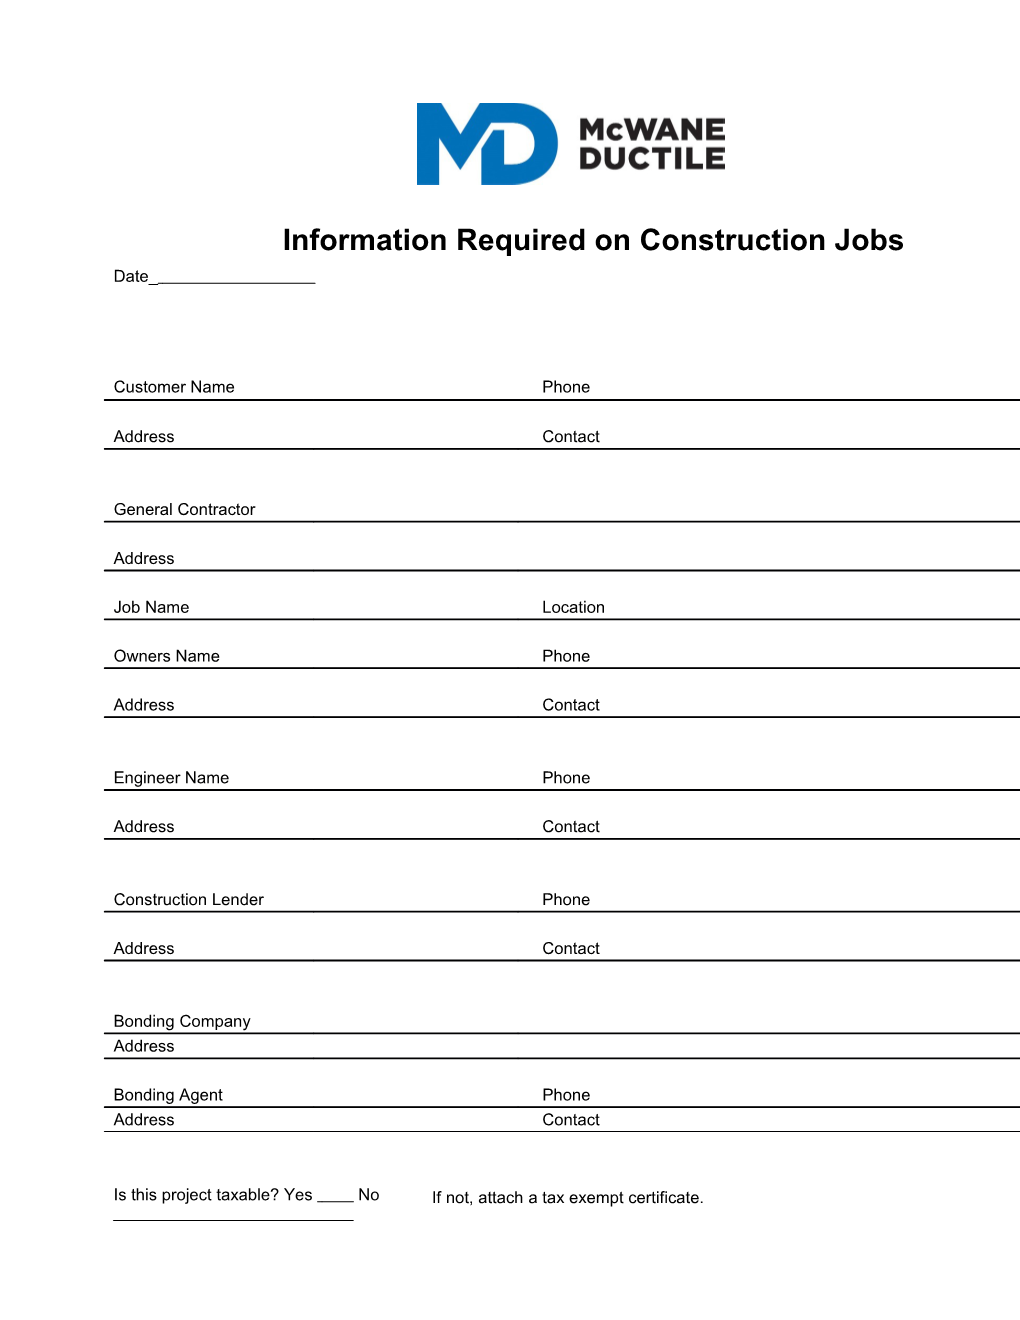 Information Required on Construction Jobs